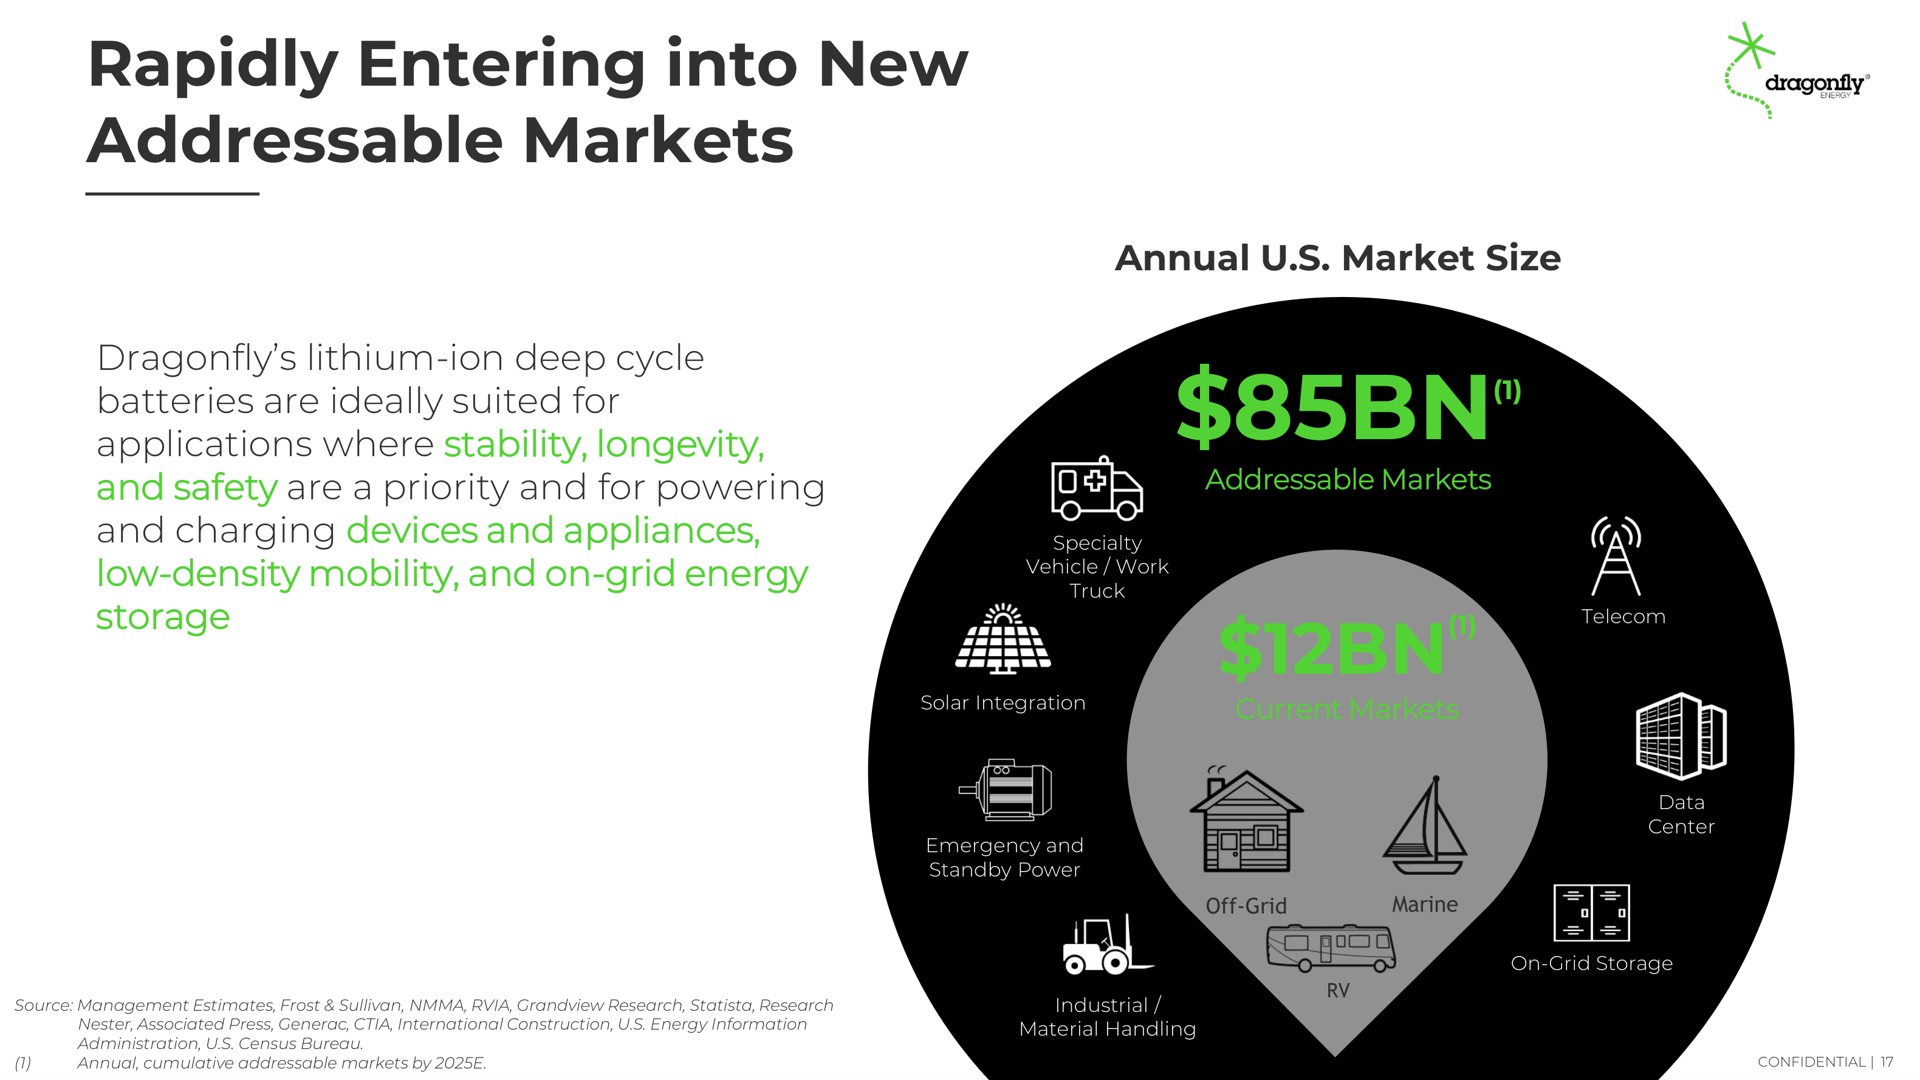 rapidly entering into new markets dragonfly lithium ion deep cycle batteries are ideally suited for applications where stability longevity and safety are a priority and for powering and charging devices and appliances low density mobility and on grid energy storage annual market size air me ere | Dragonfly Energy